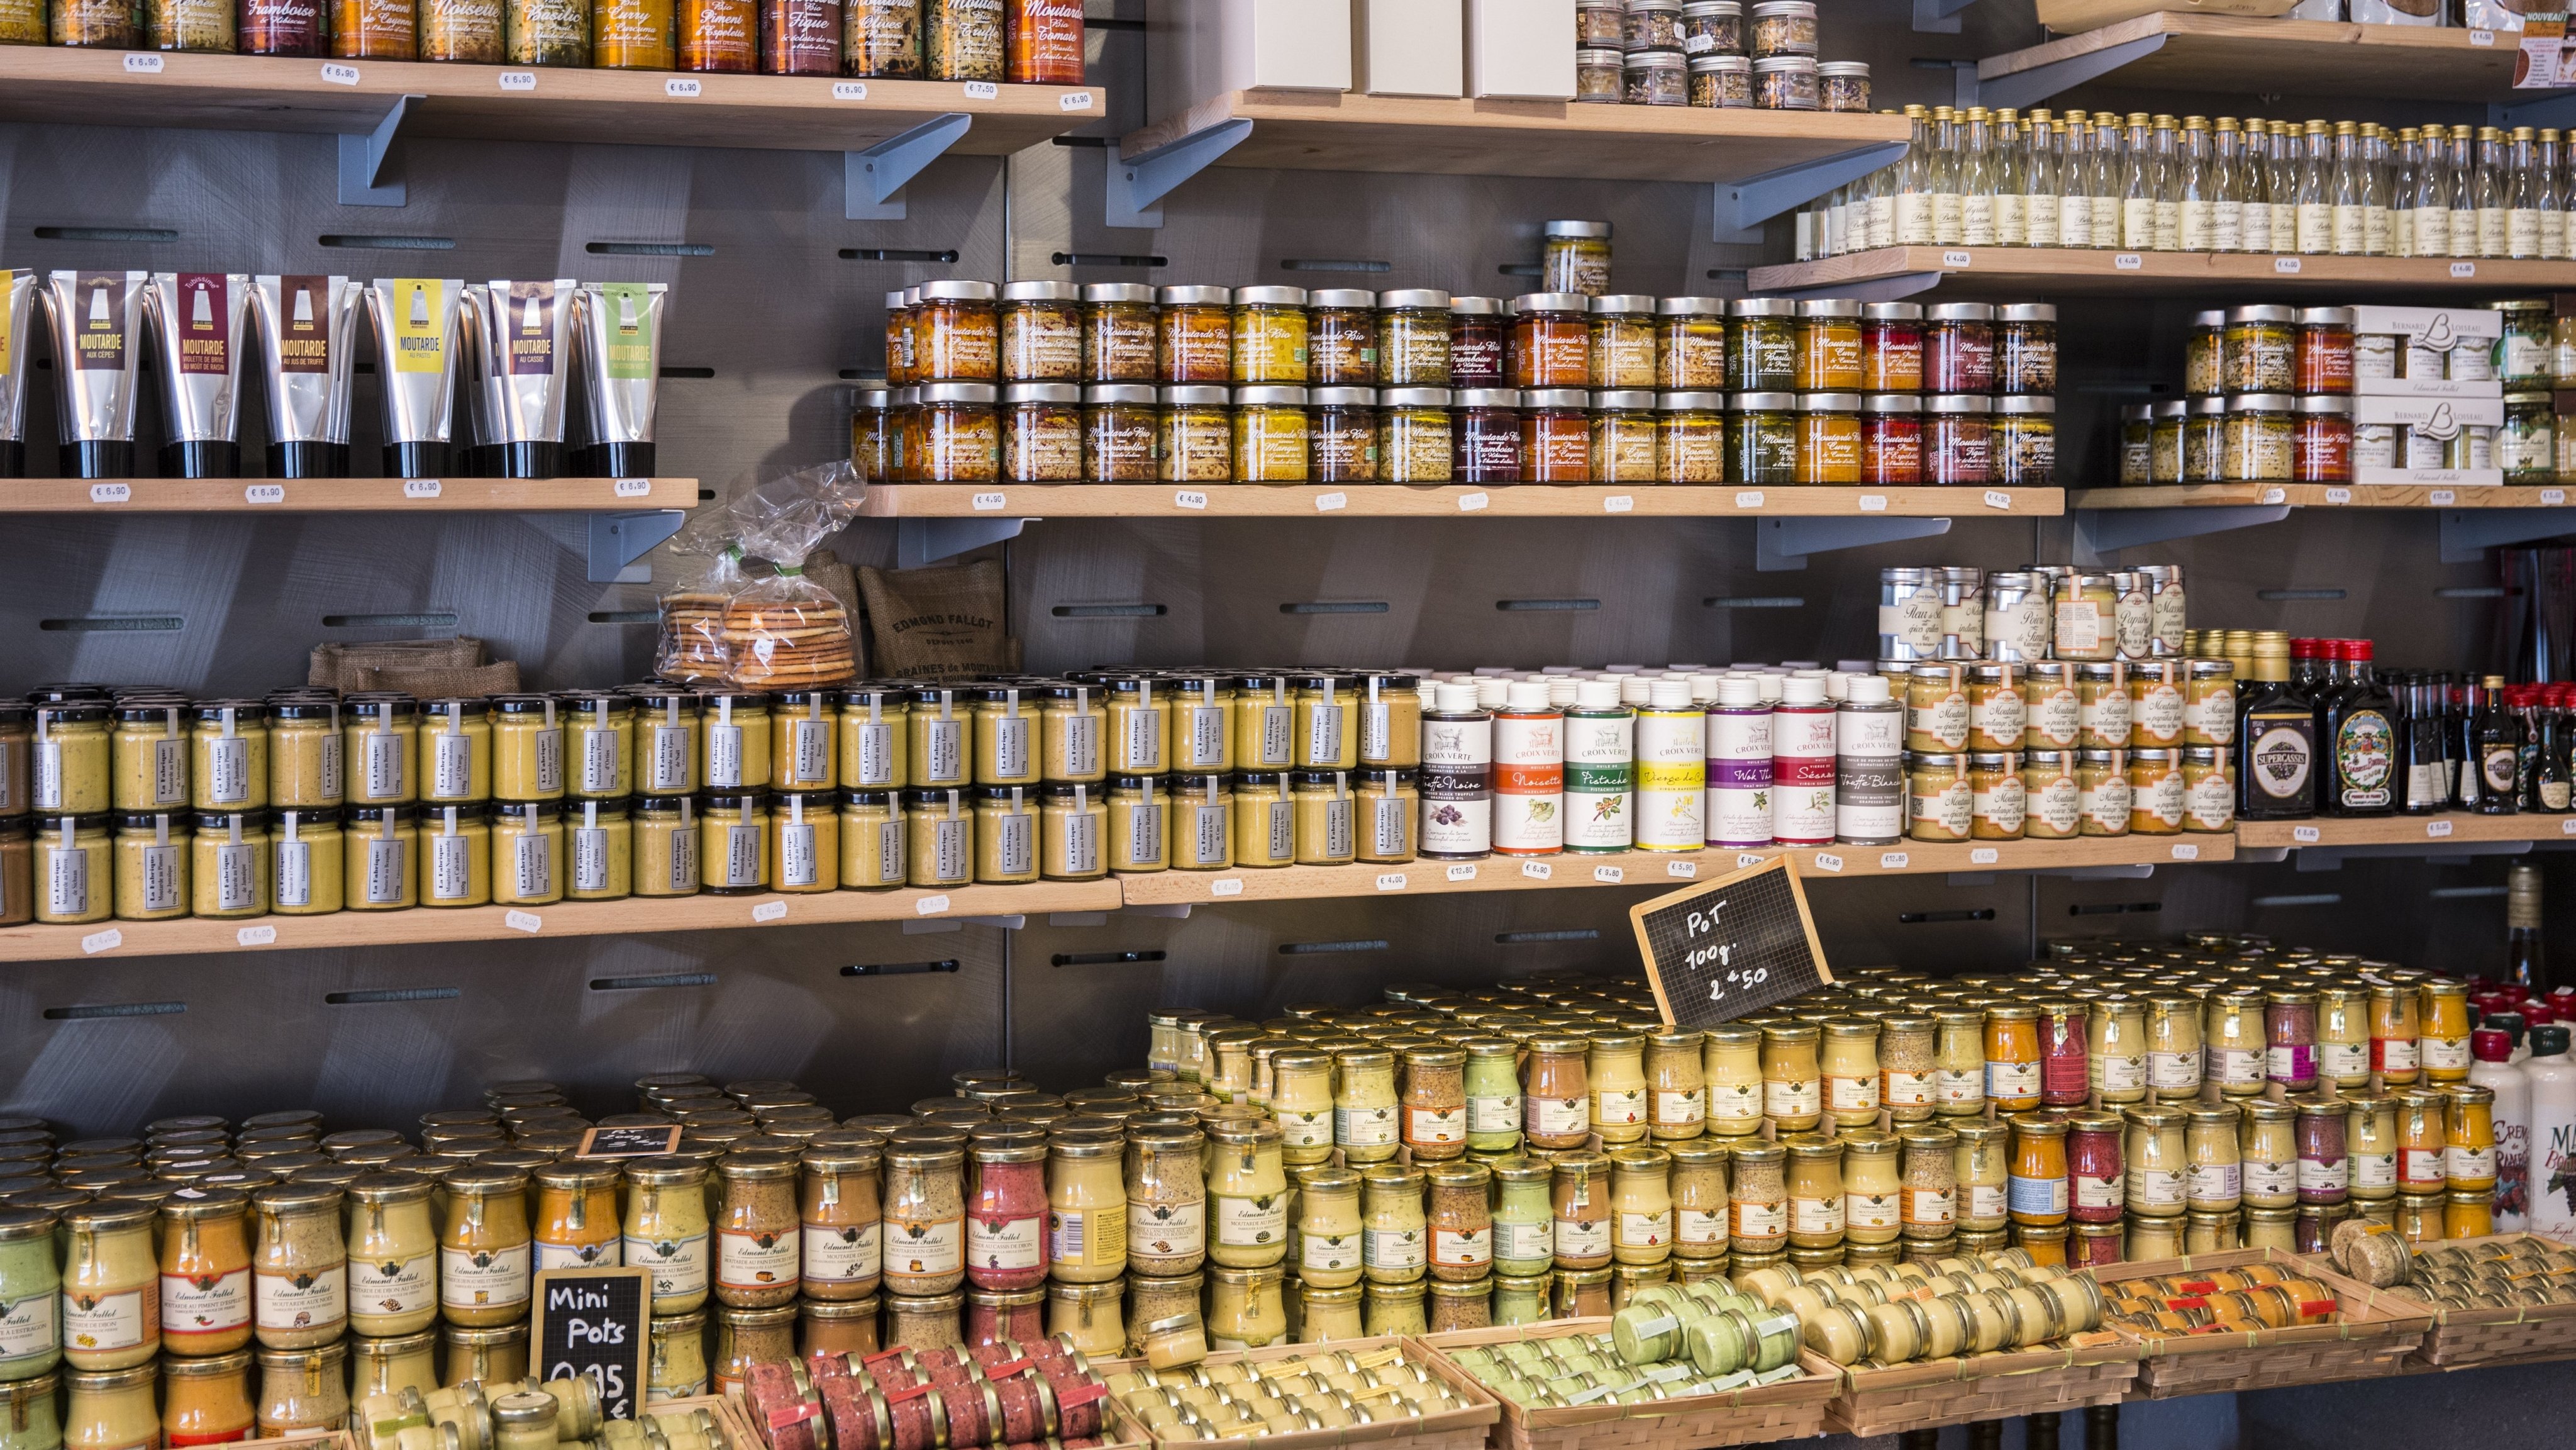 Dijon Mustard and Speciality Food, France